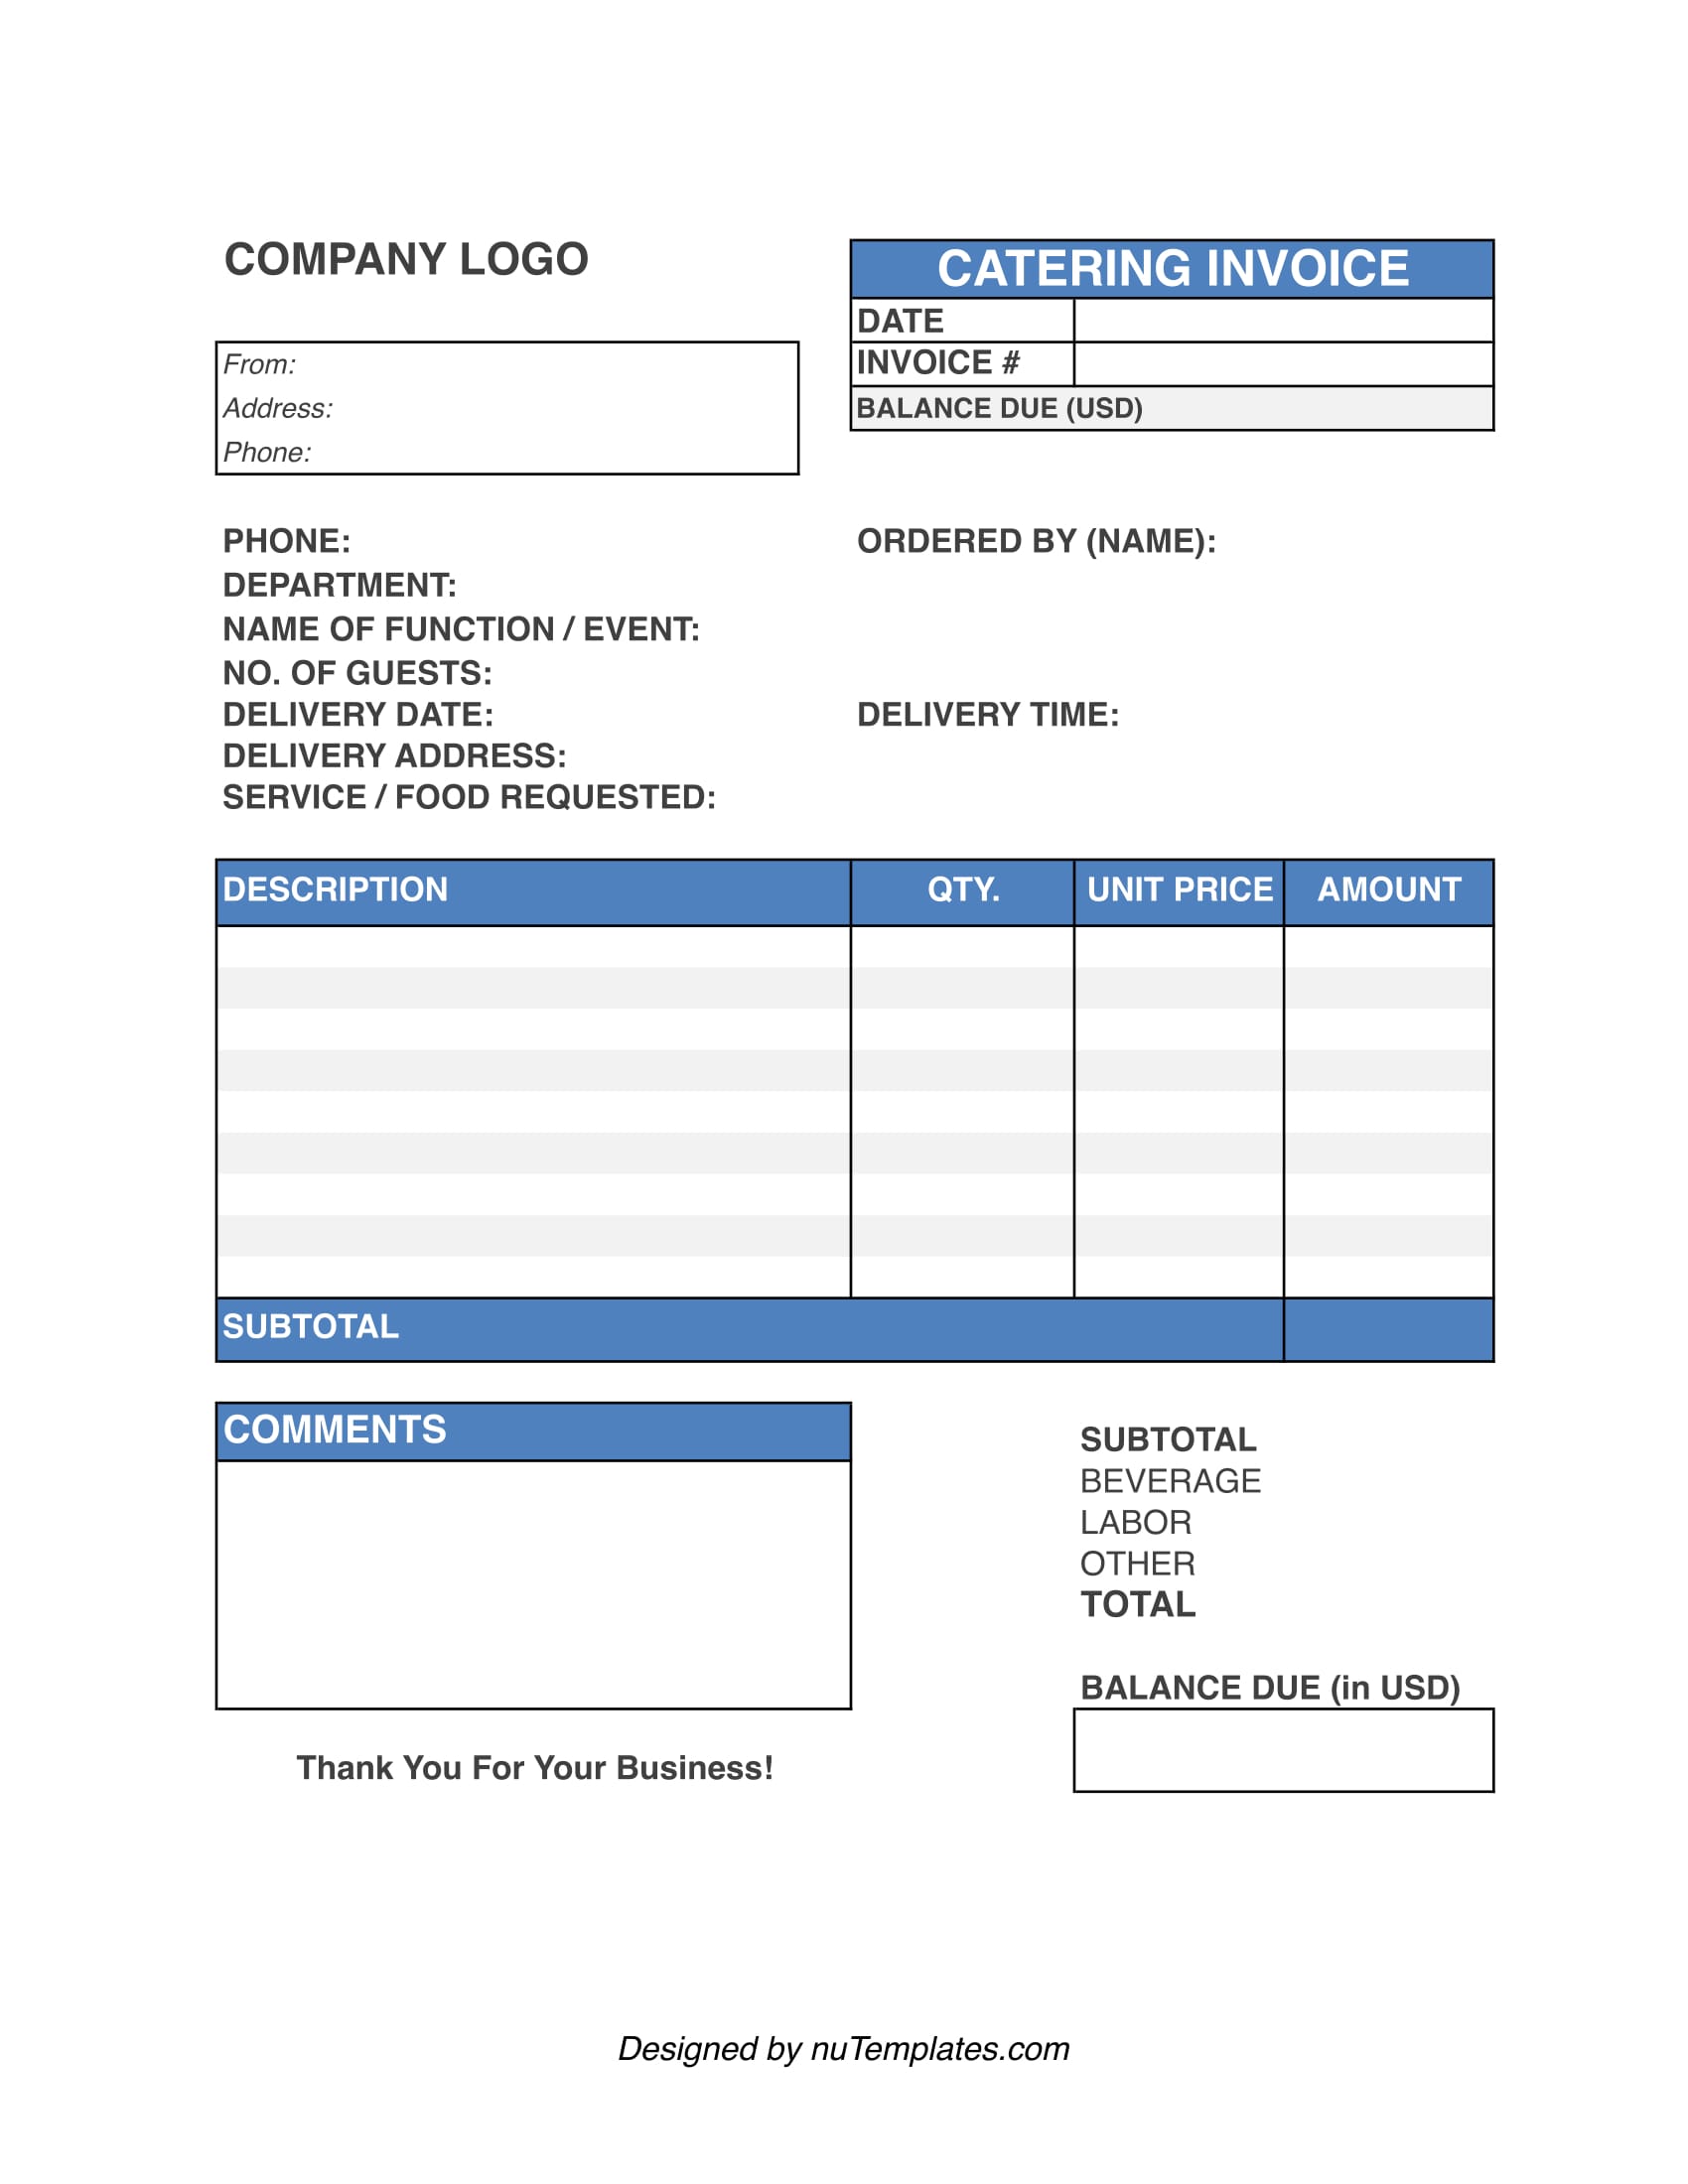 catering-invoice-template